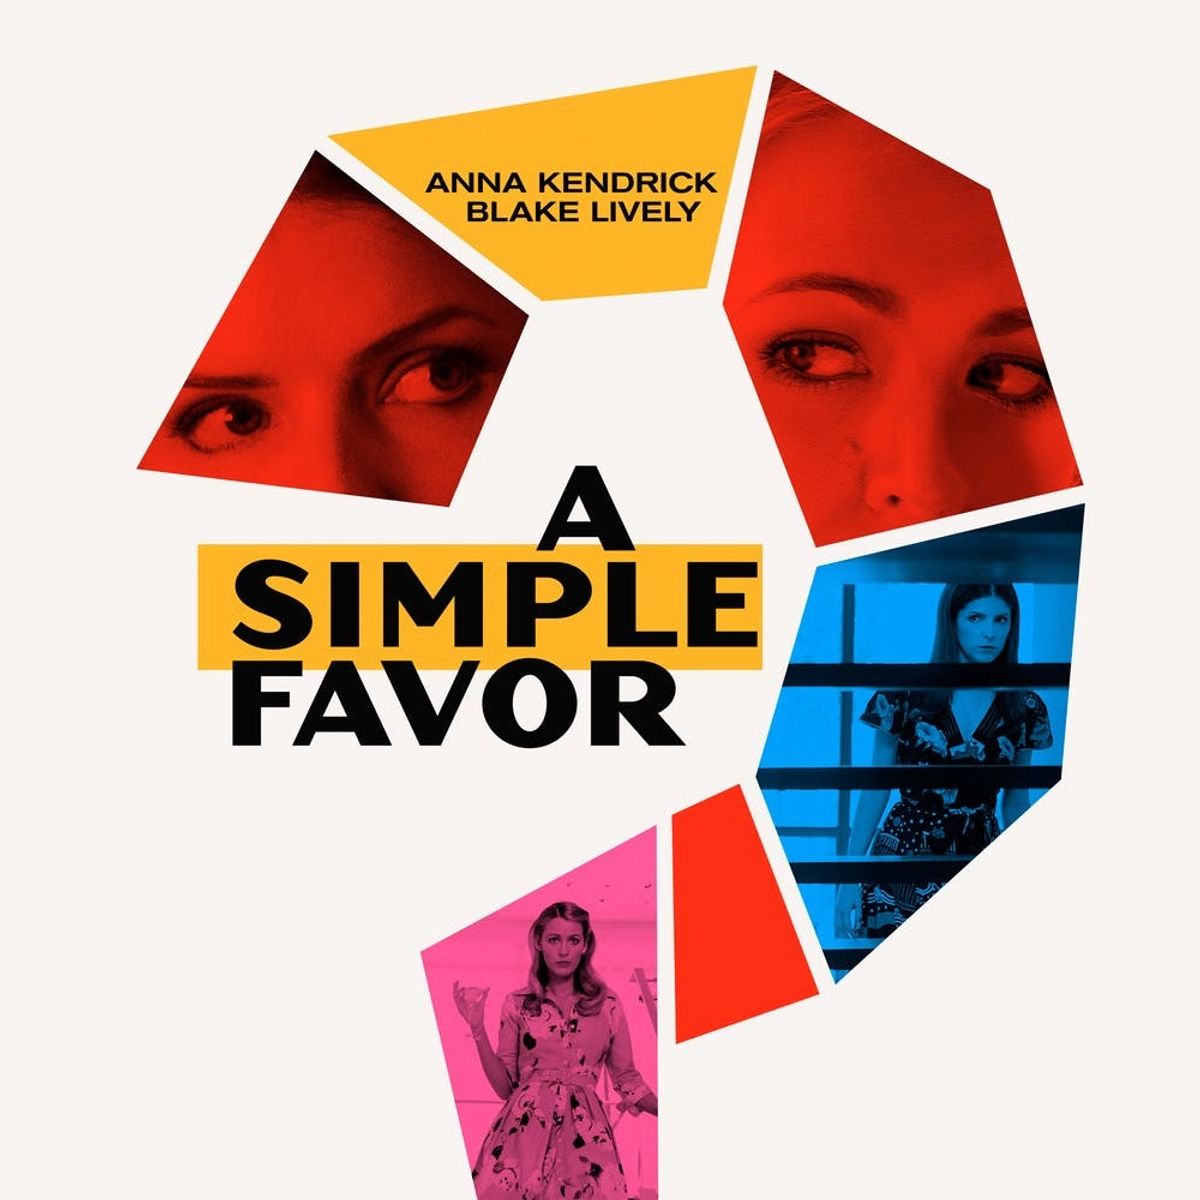 Blake Lively Returned to Instagram to Share the Trailer for Her New Movie ‘A Simple Favor’